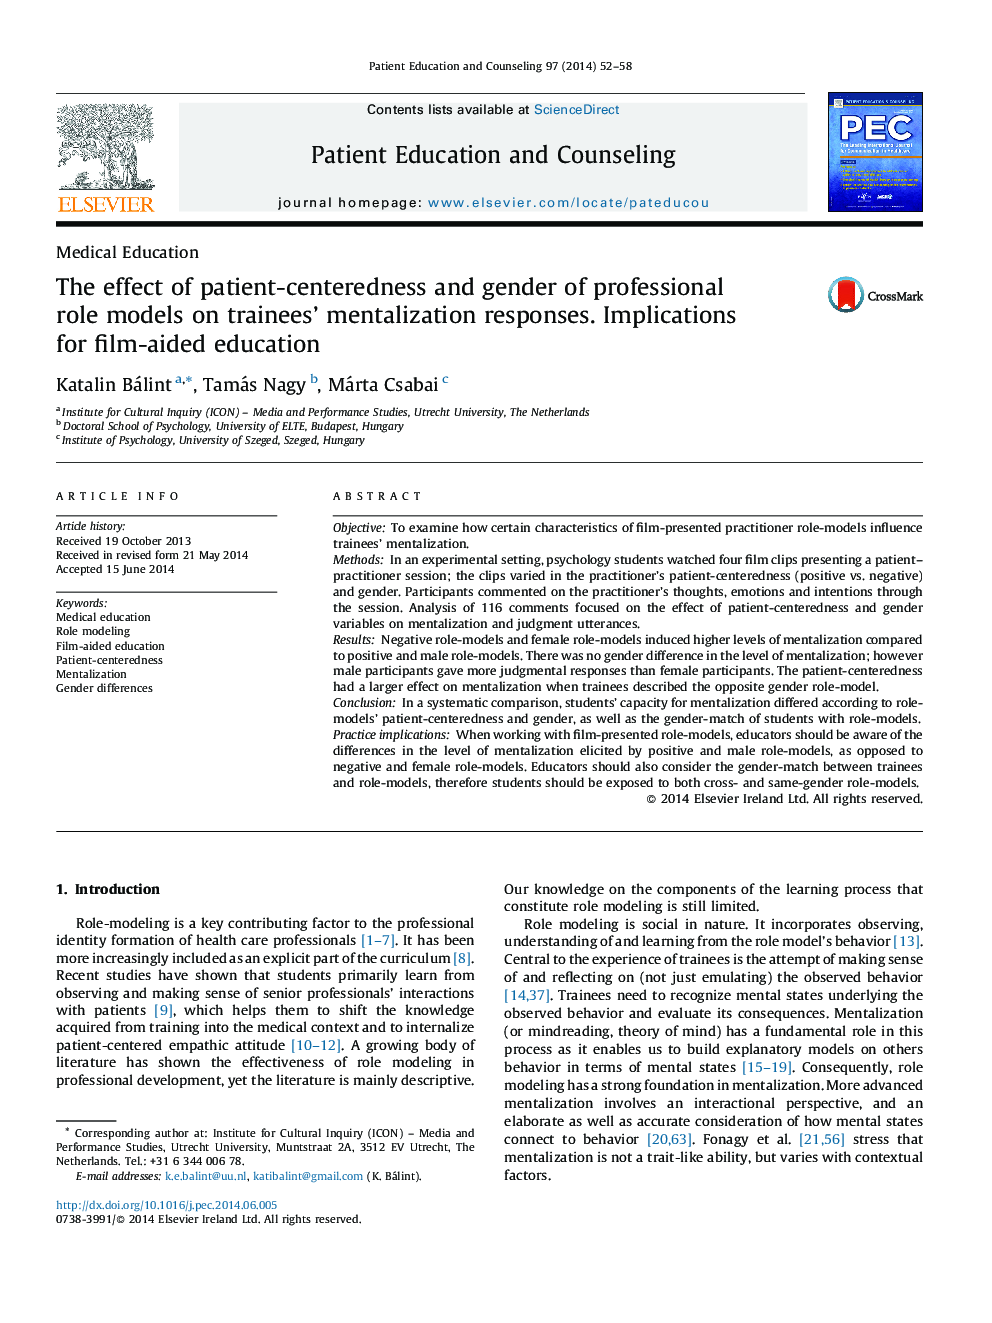 The effect of patient-centeredness and gender of professional role models on trainees' mentalization responses. Implications for film-aided education